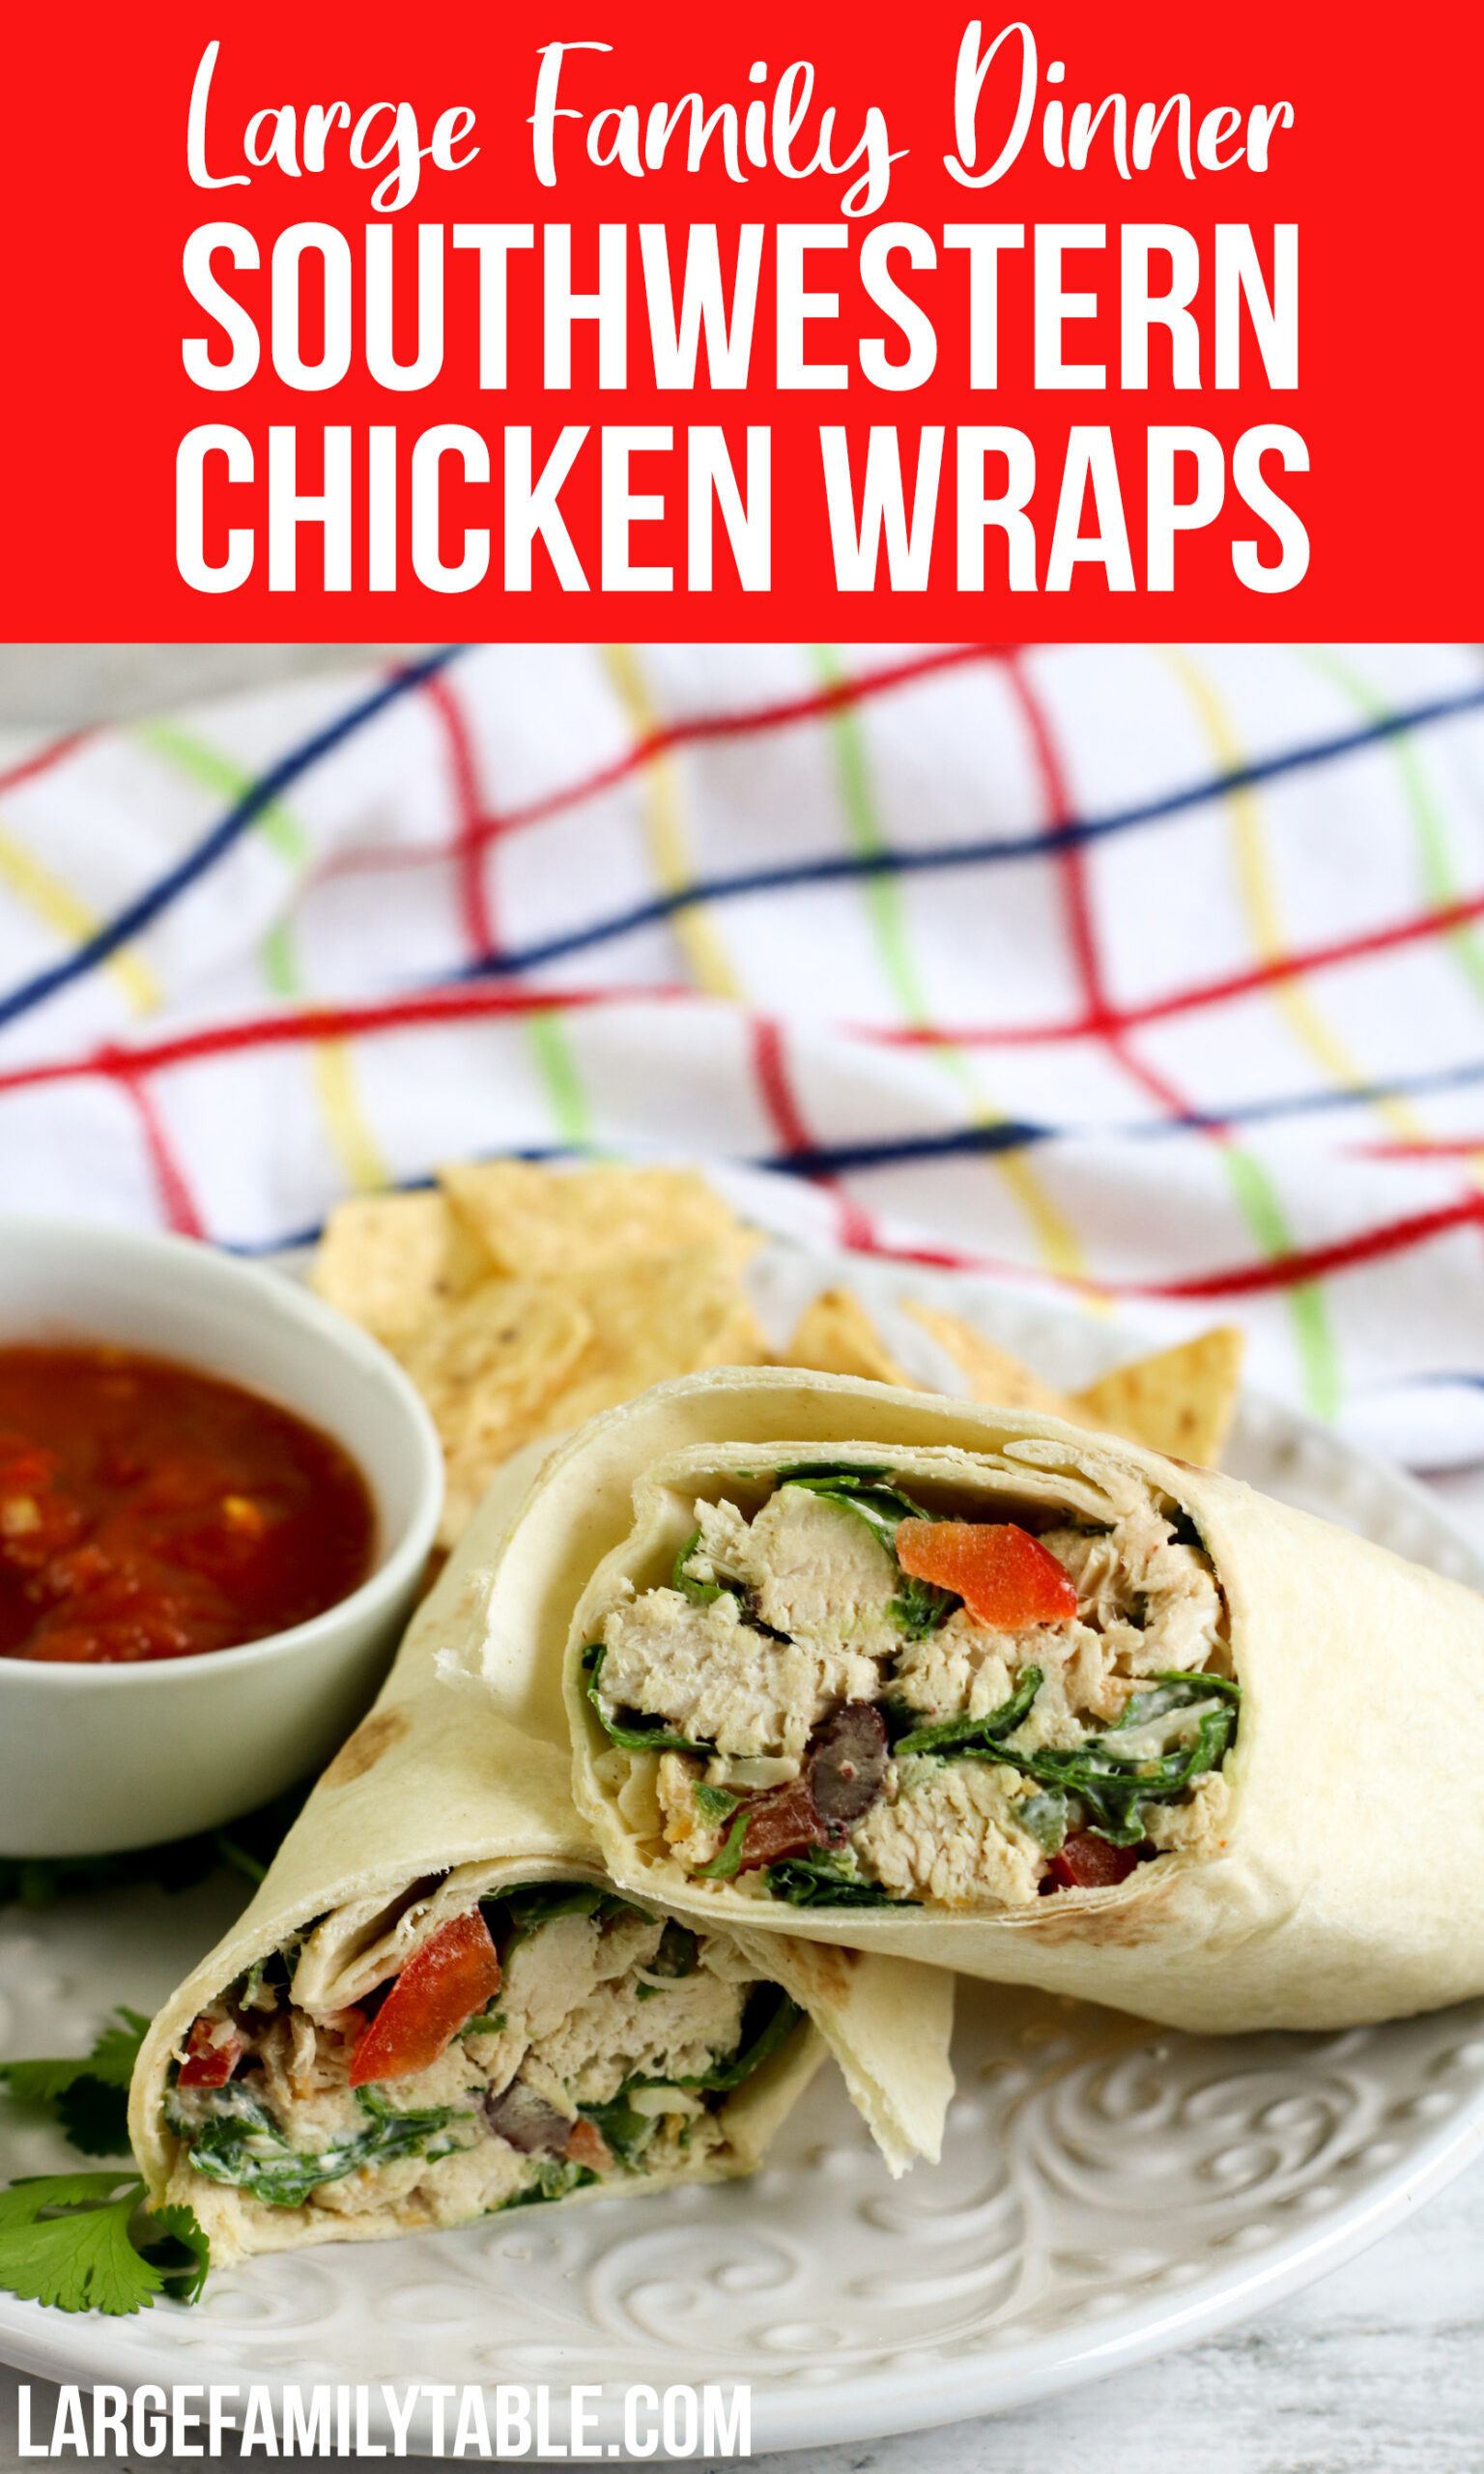 Southwestern Chicken Wraps | Large Family Dinner - Large Family Table